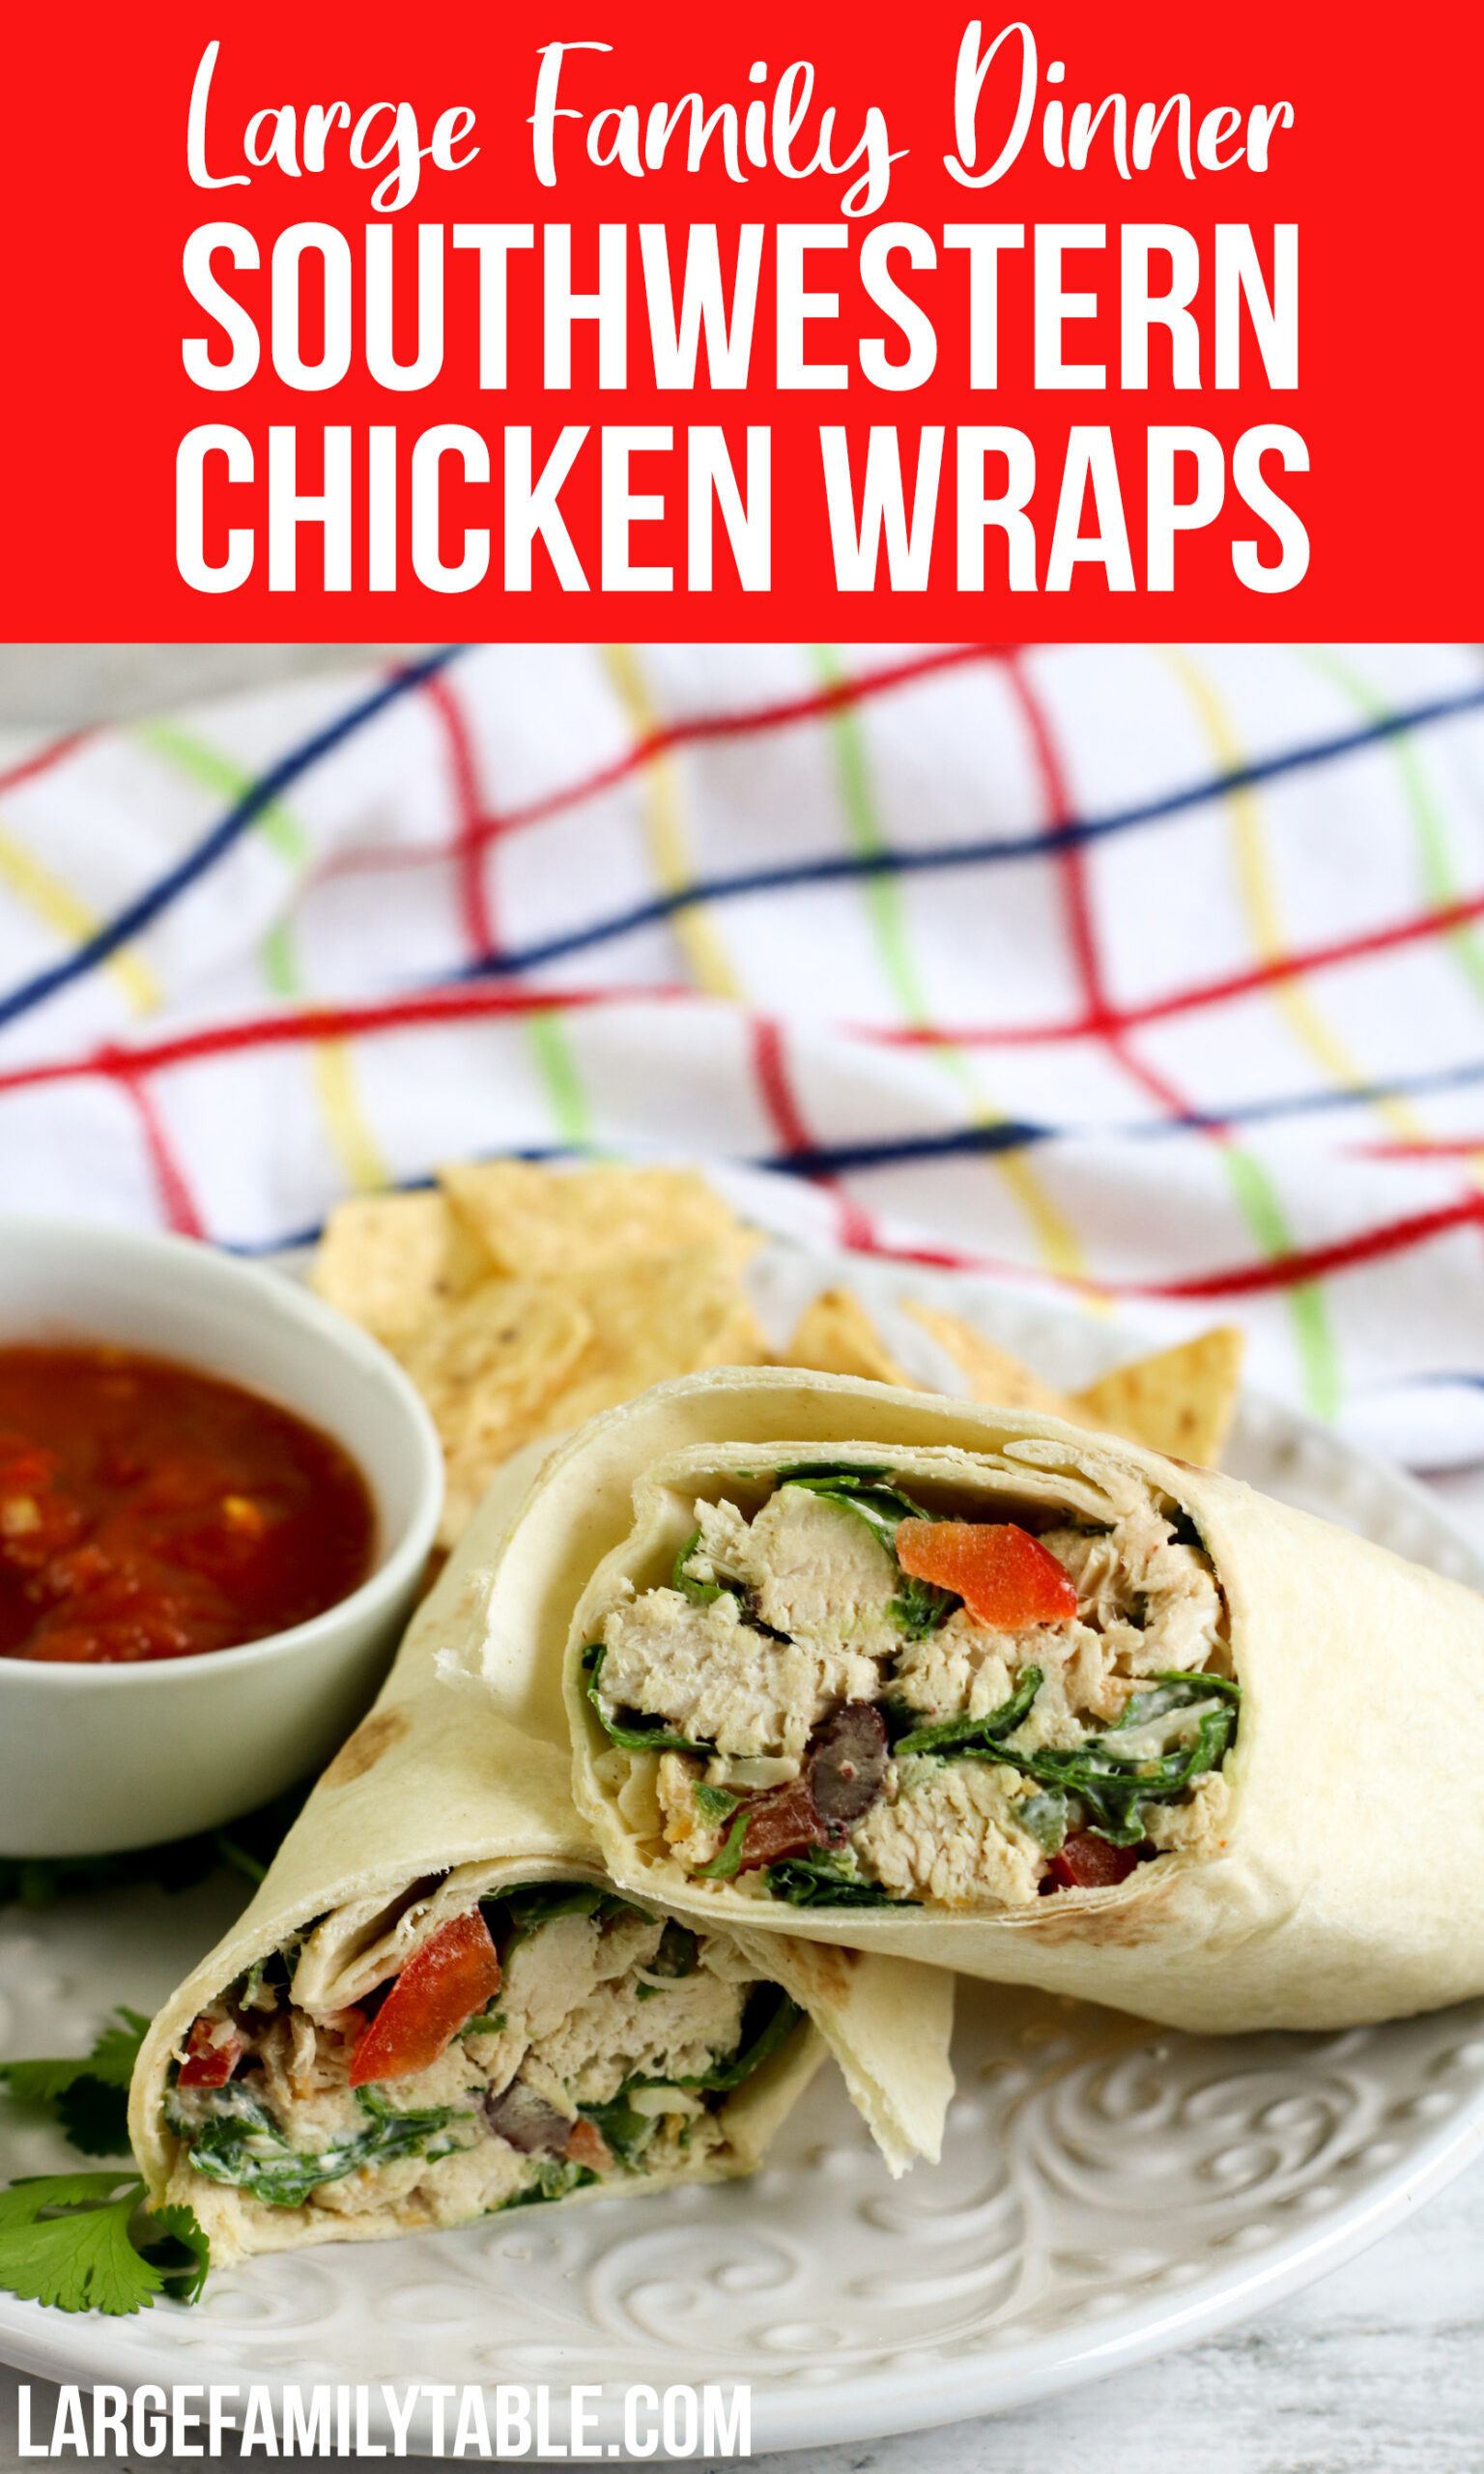 Southwestern Chicken Wraps | Large Family Dinner - Large Family Table